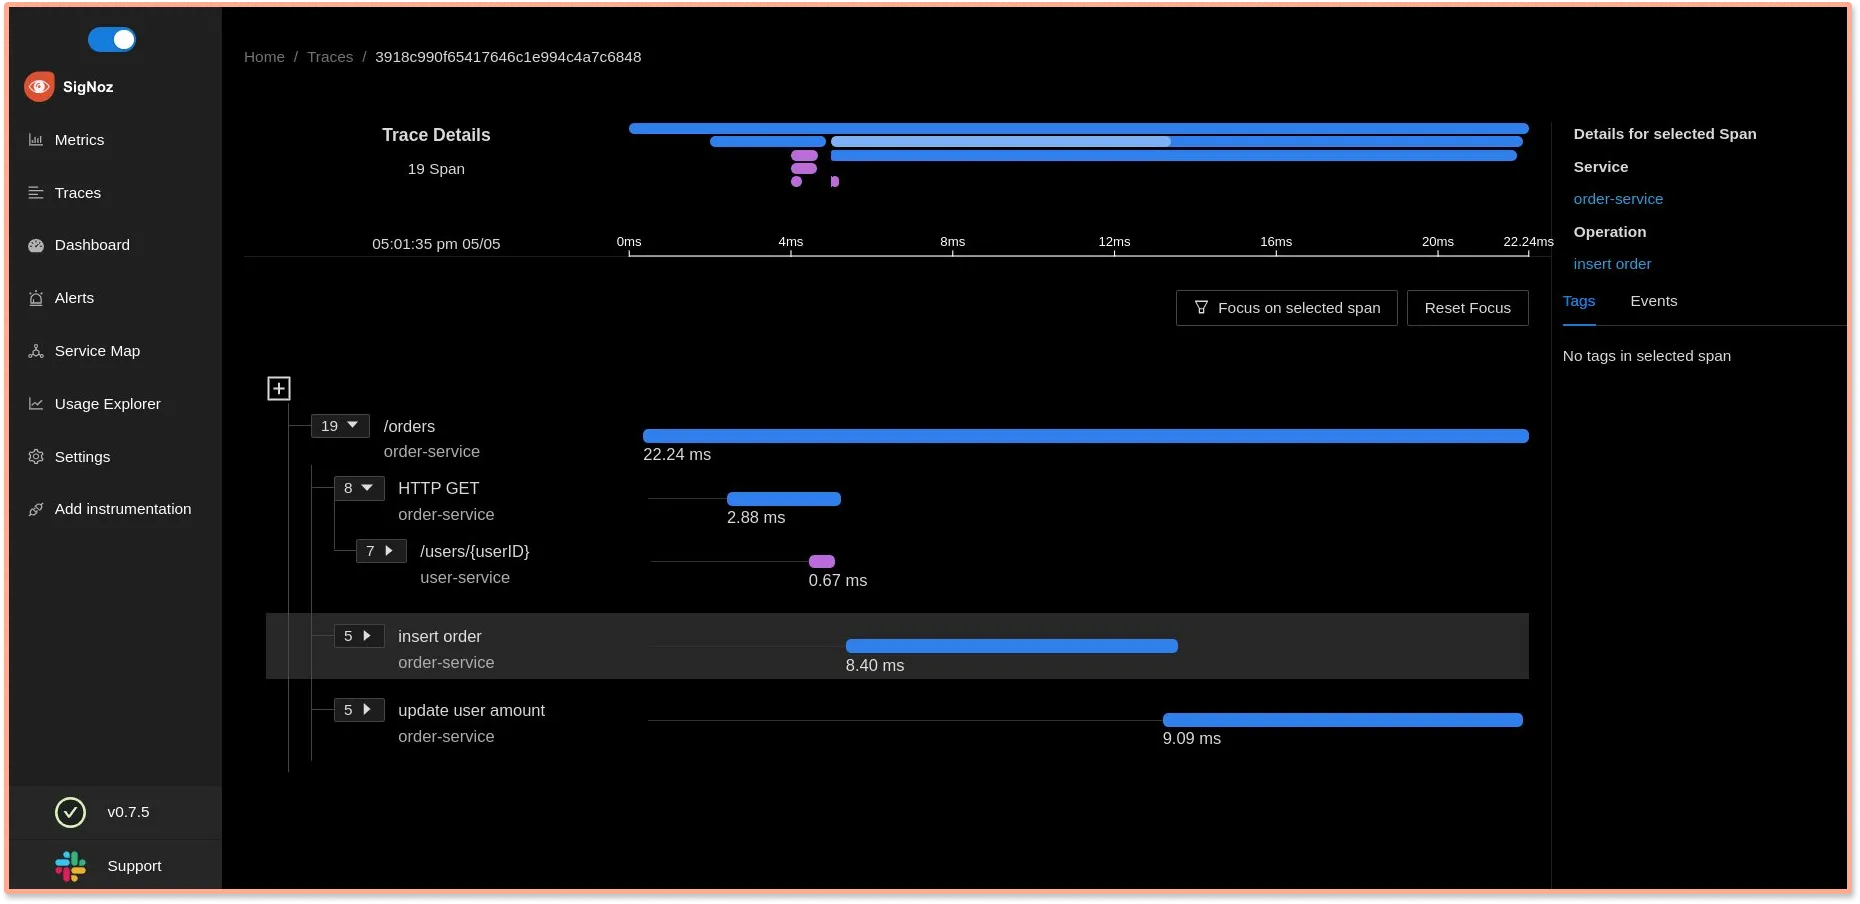 SigNoz dashboard showing a user request broken down by Flamegraphs and Gantt charts